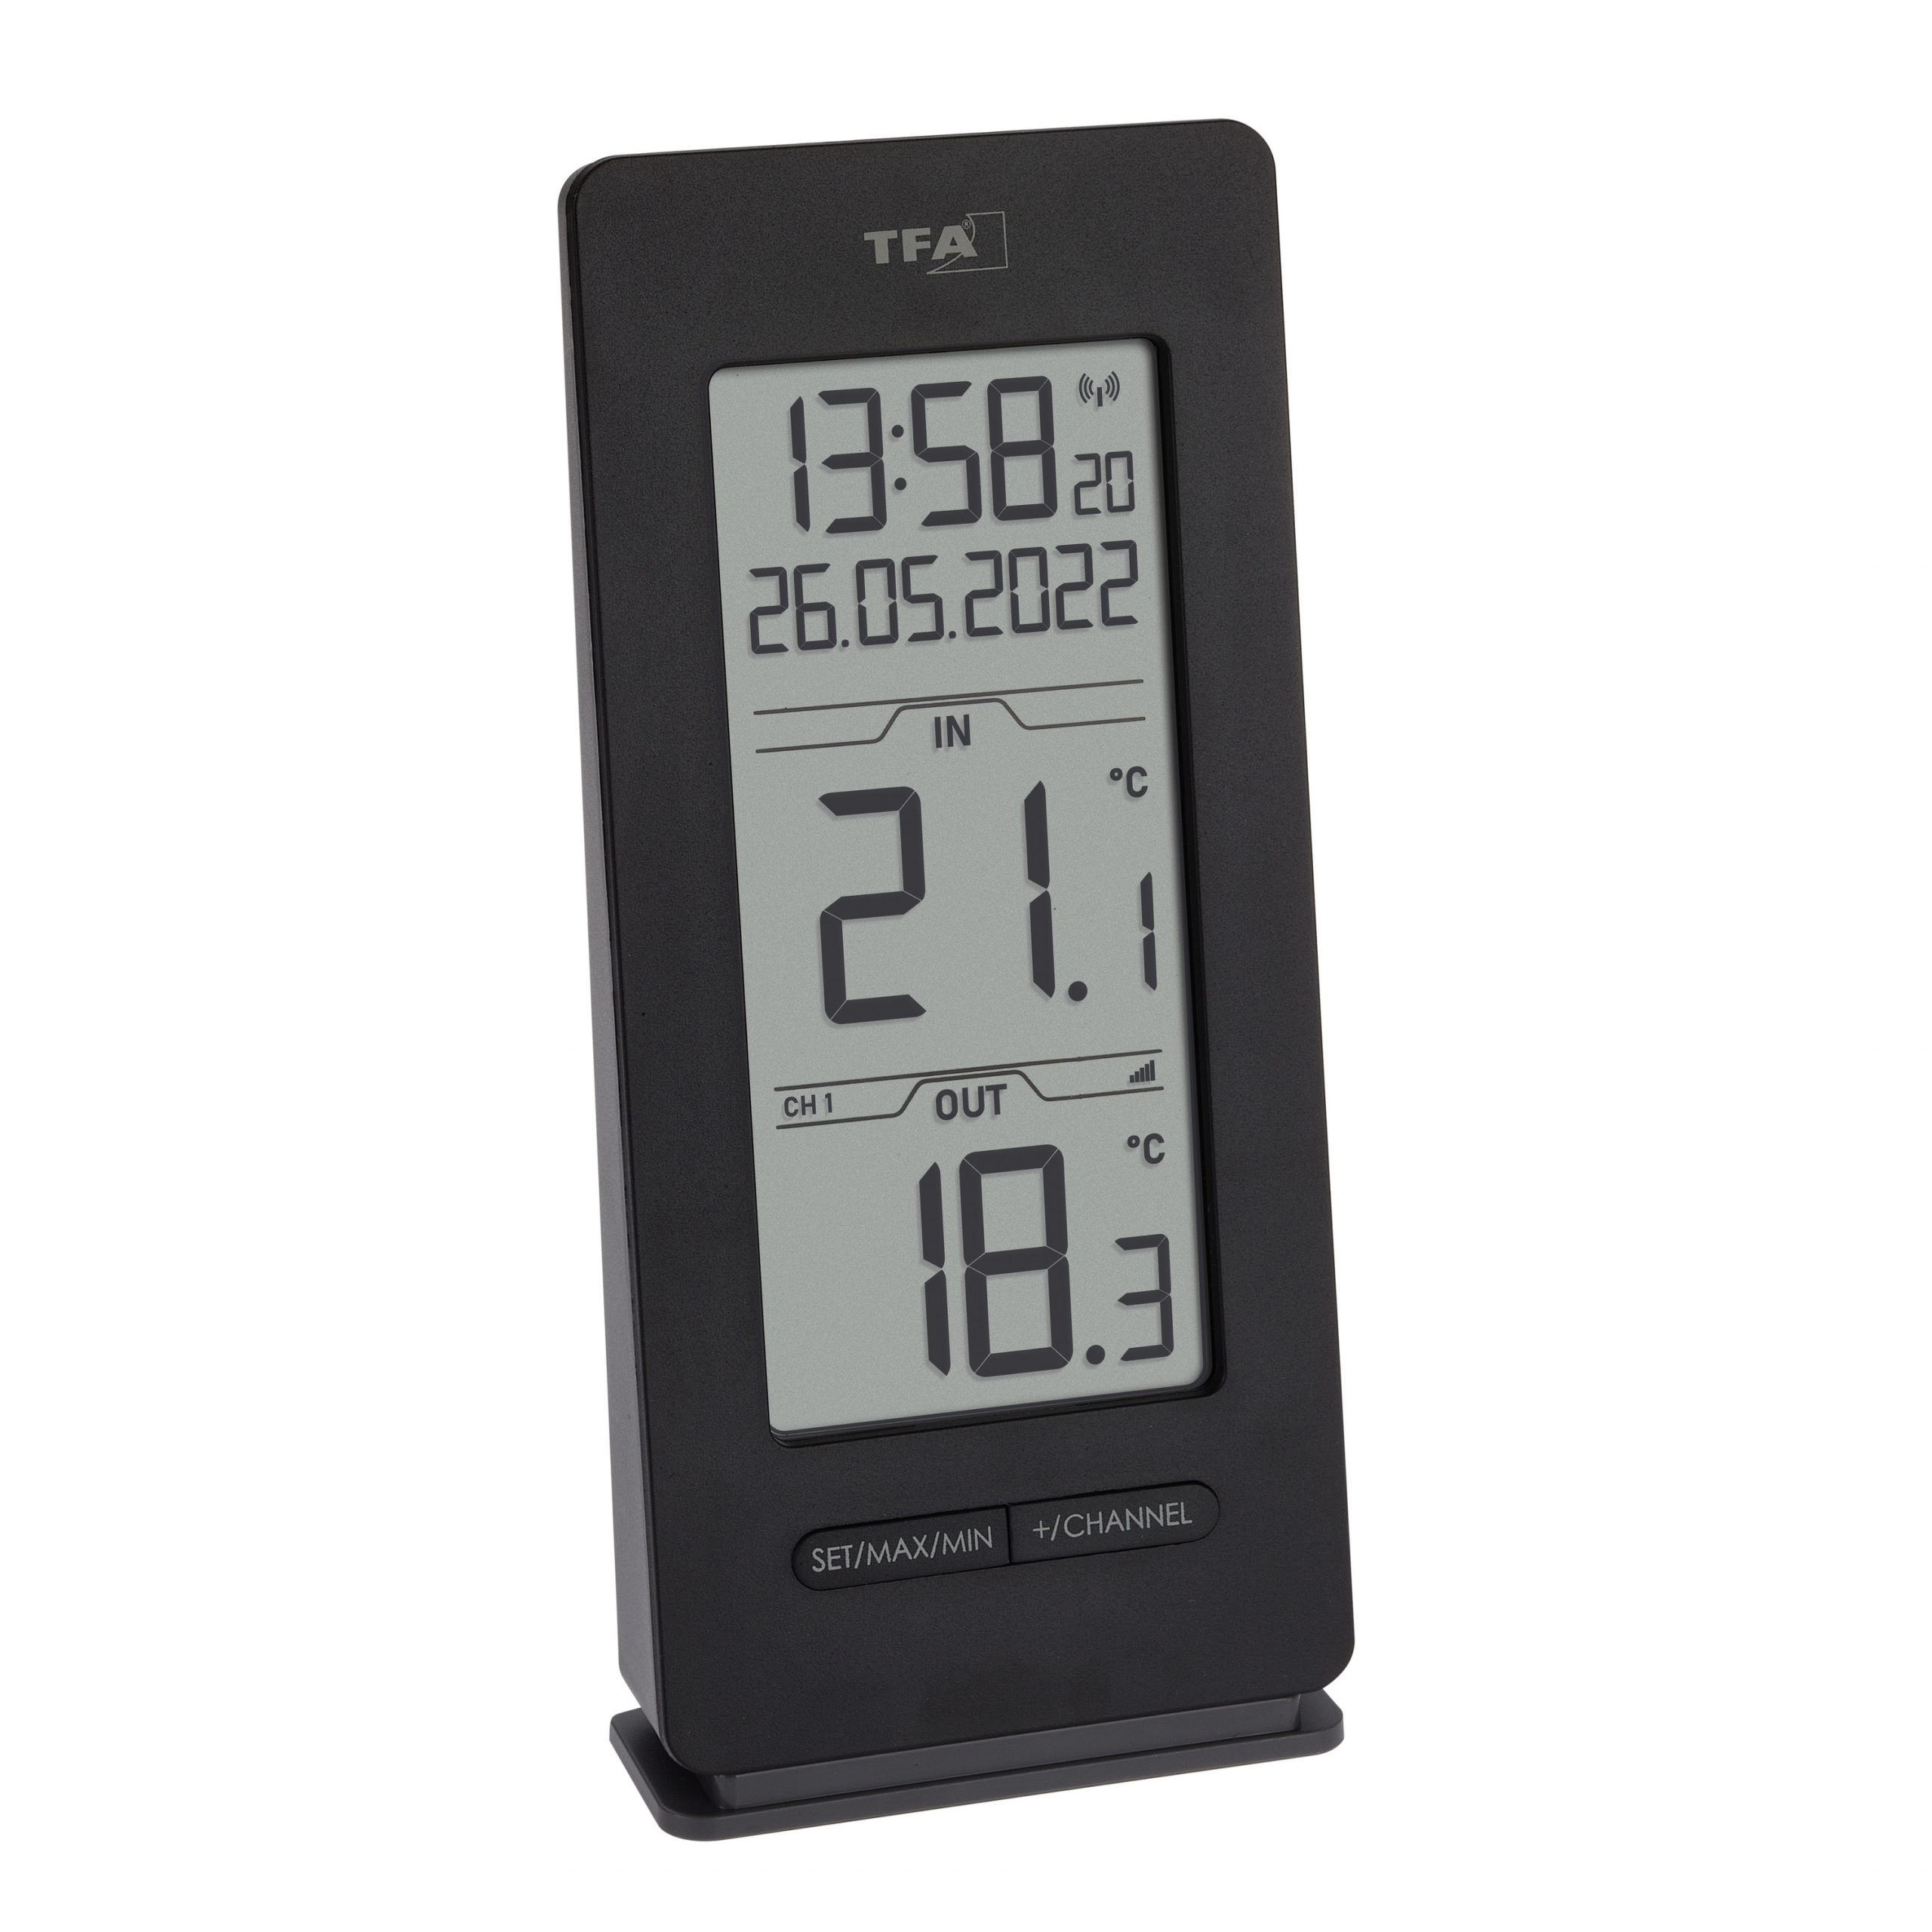 Wireless thermometer Exclusive Model